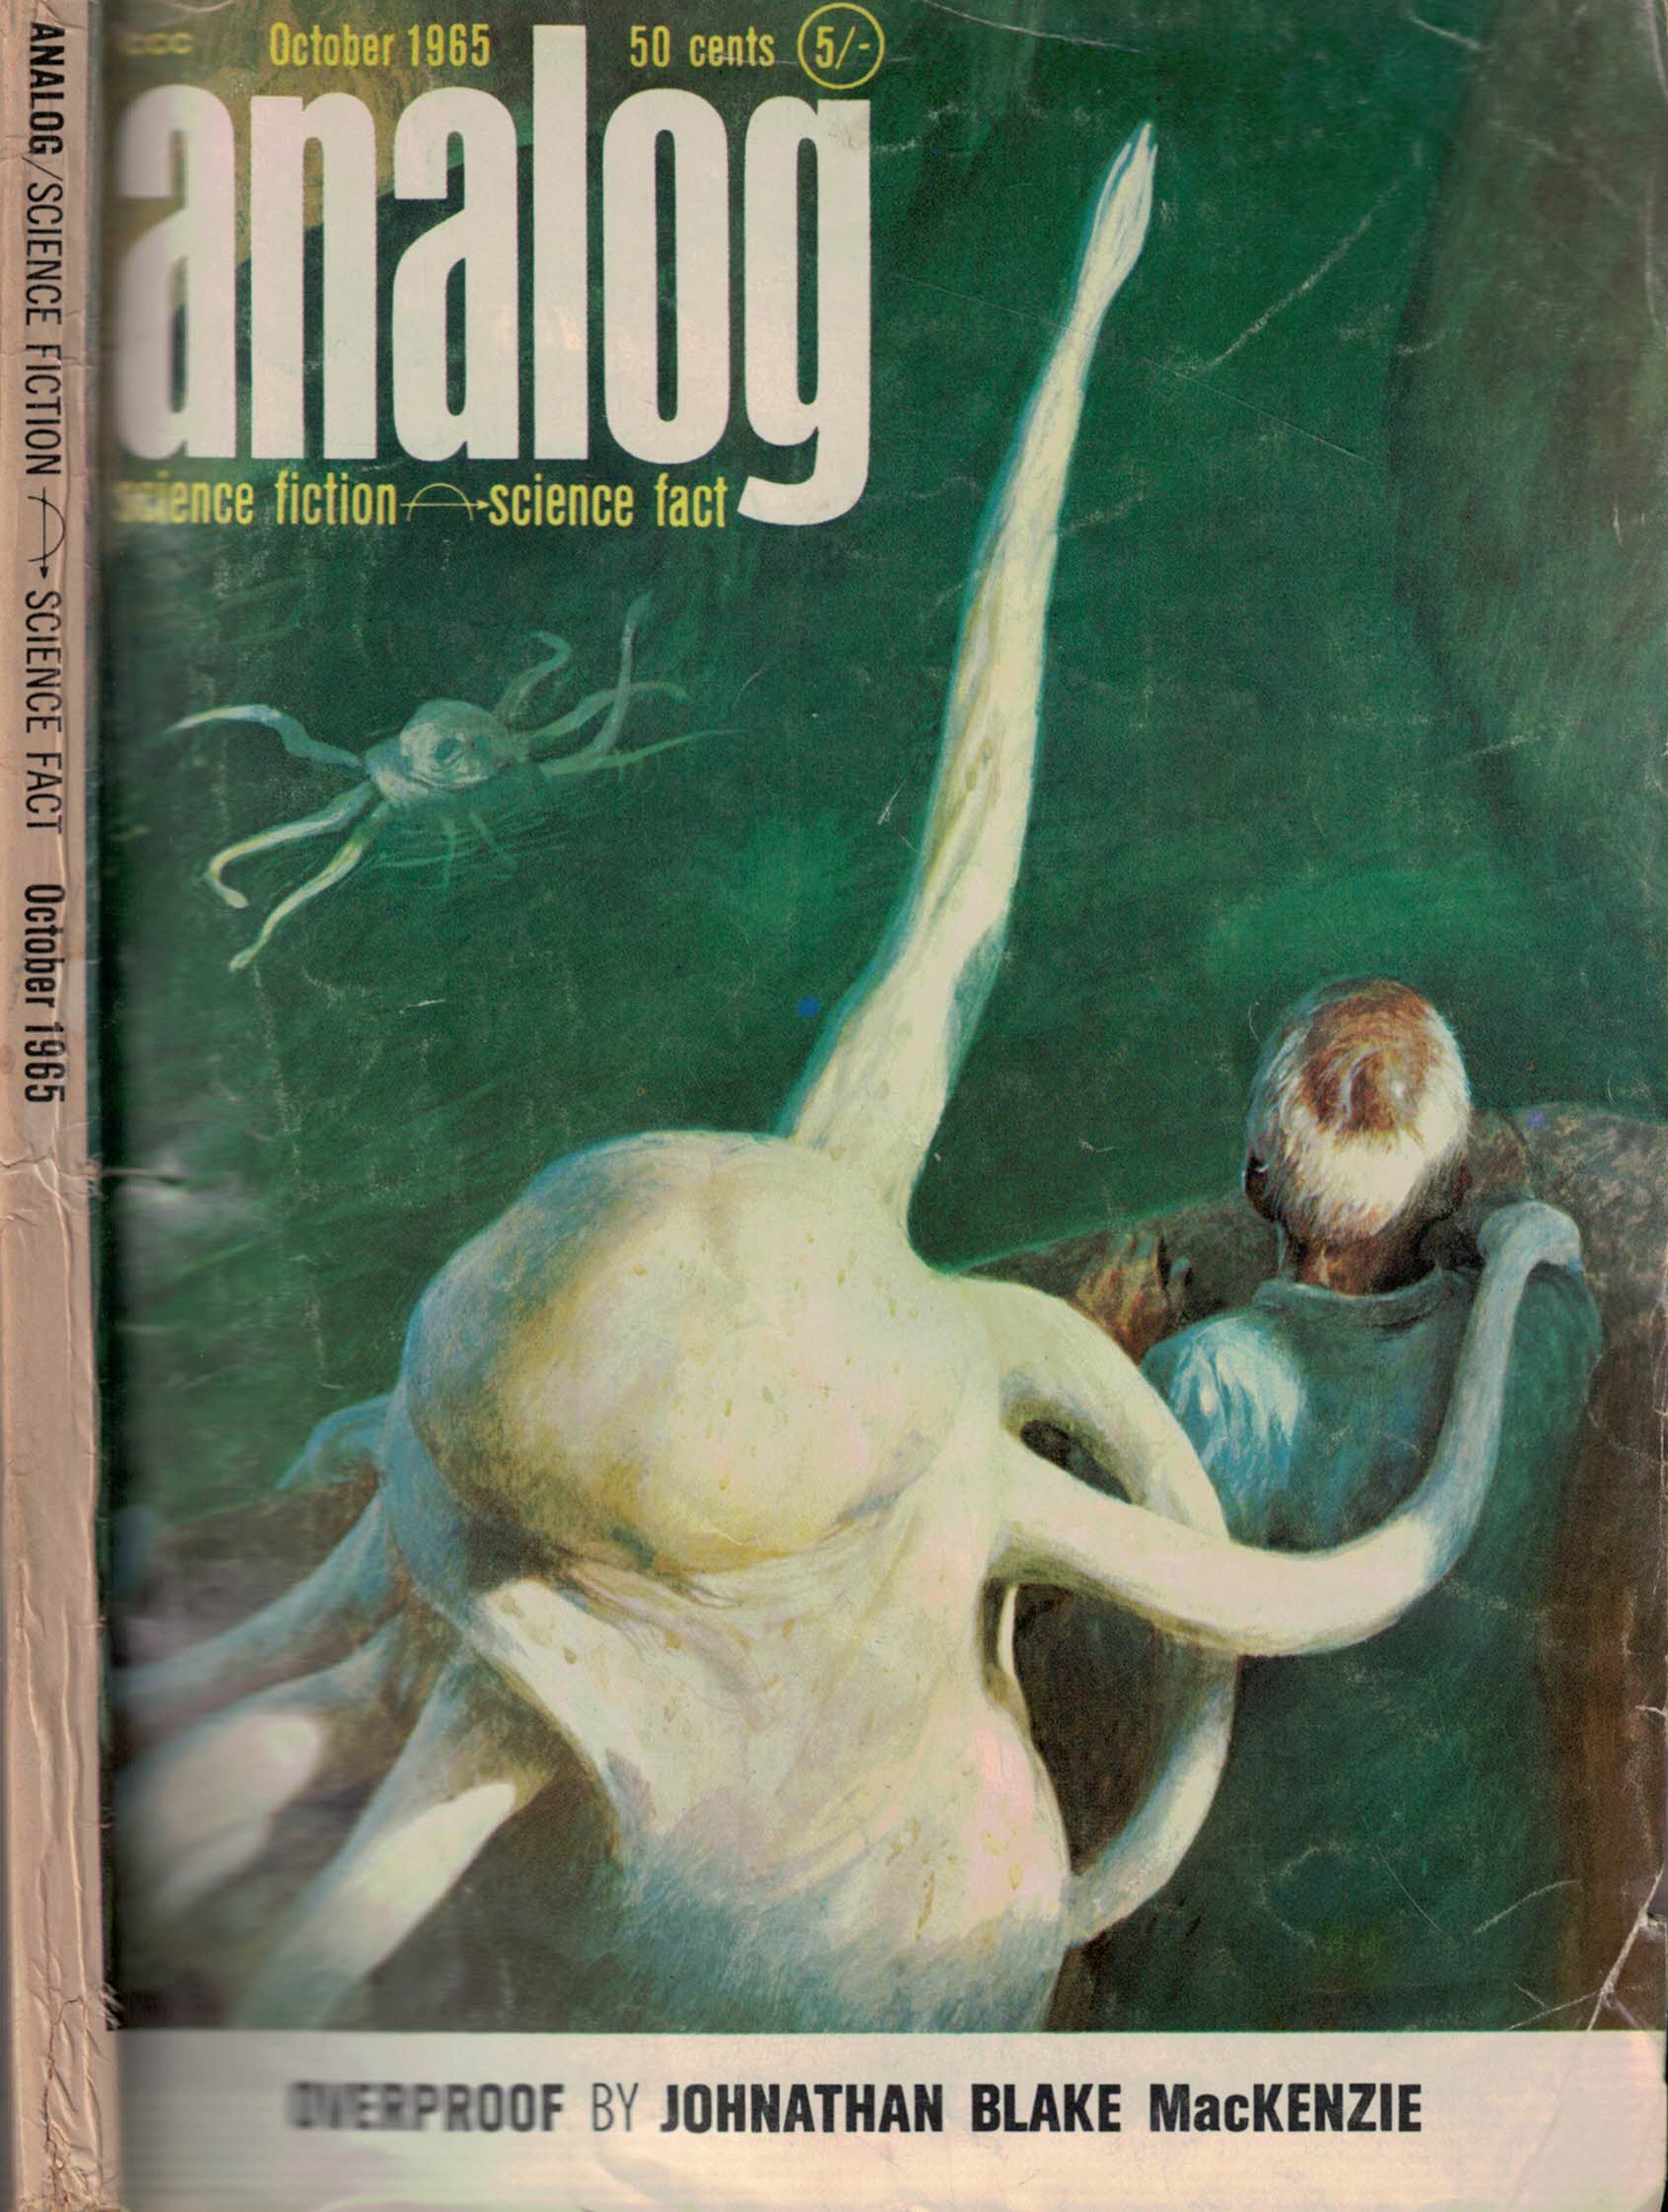 Analog. Science Fiction and Fact. Volume 76, Number 2. October 1965.